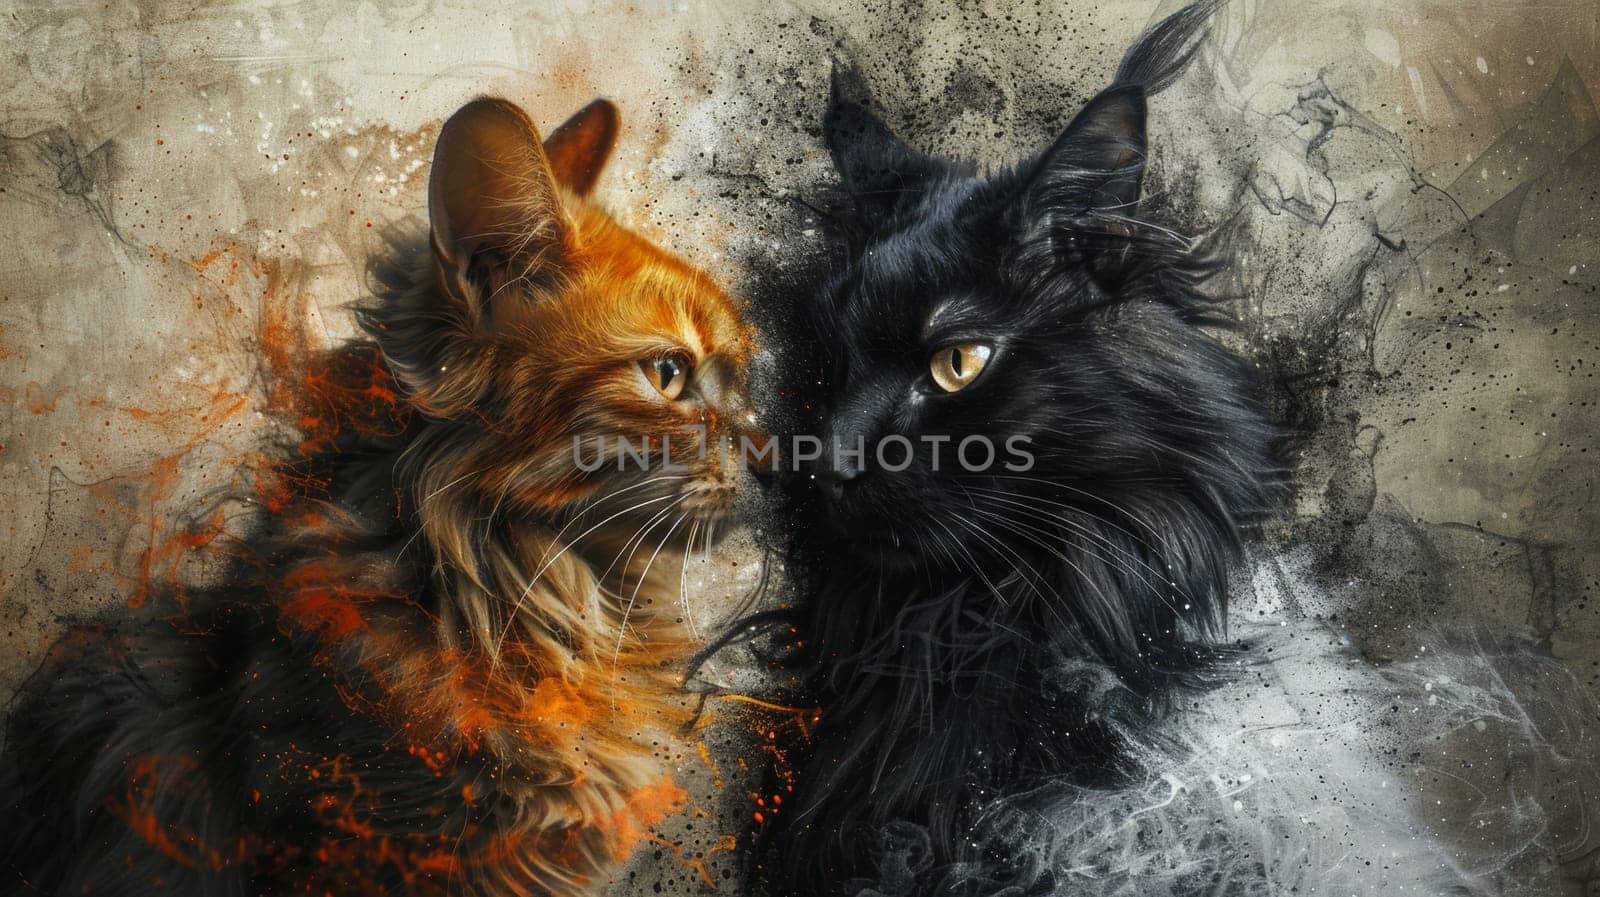 A painting of two cats face each other with one black and the other orange